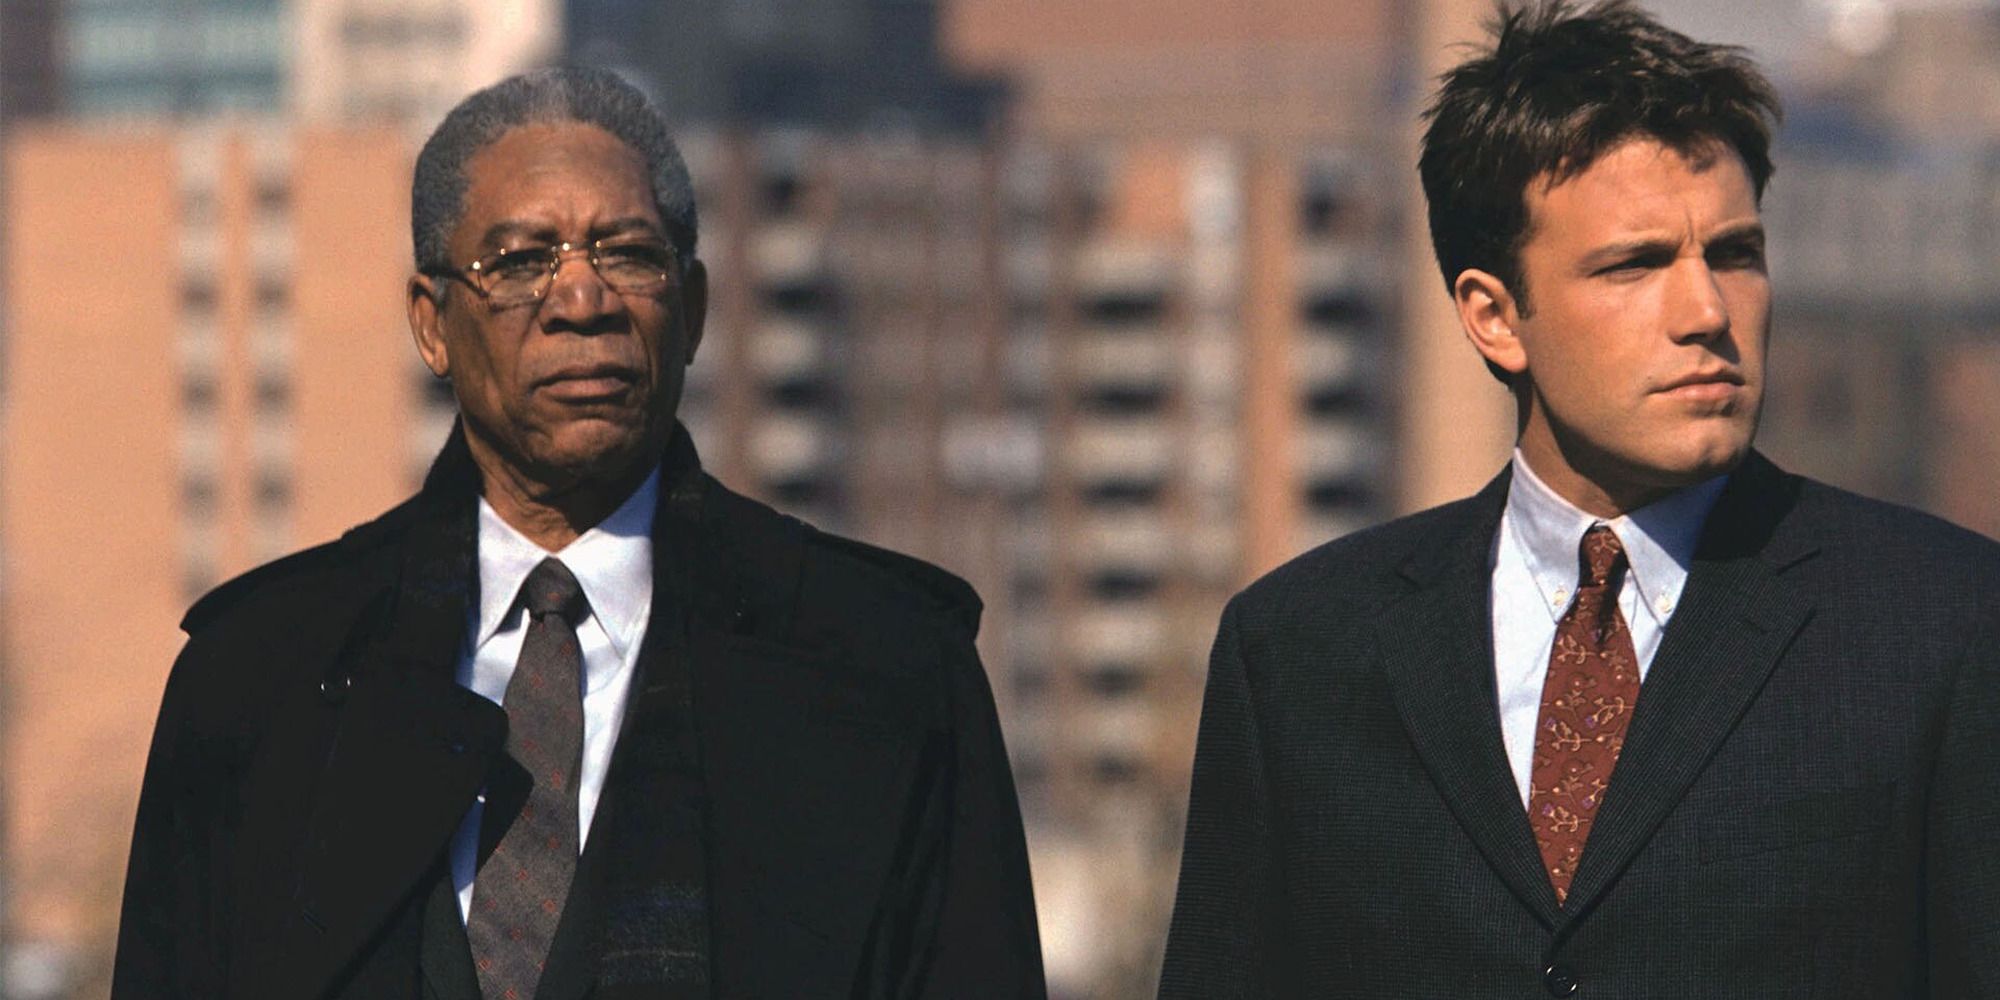 two men in suits standing atop a building with the city in the background